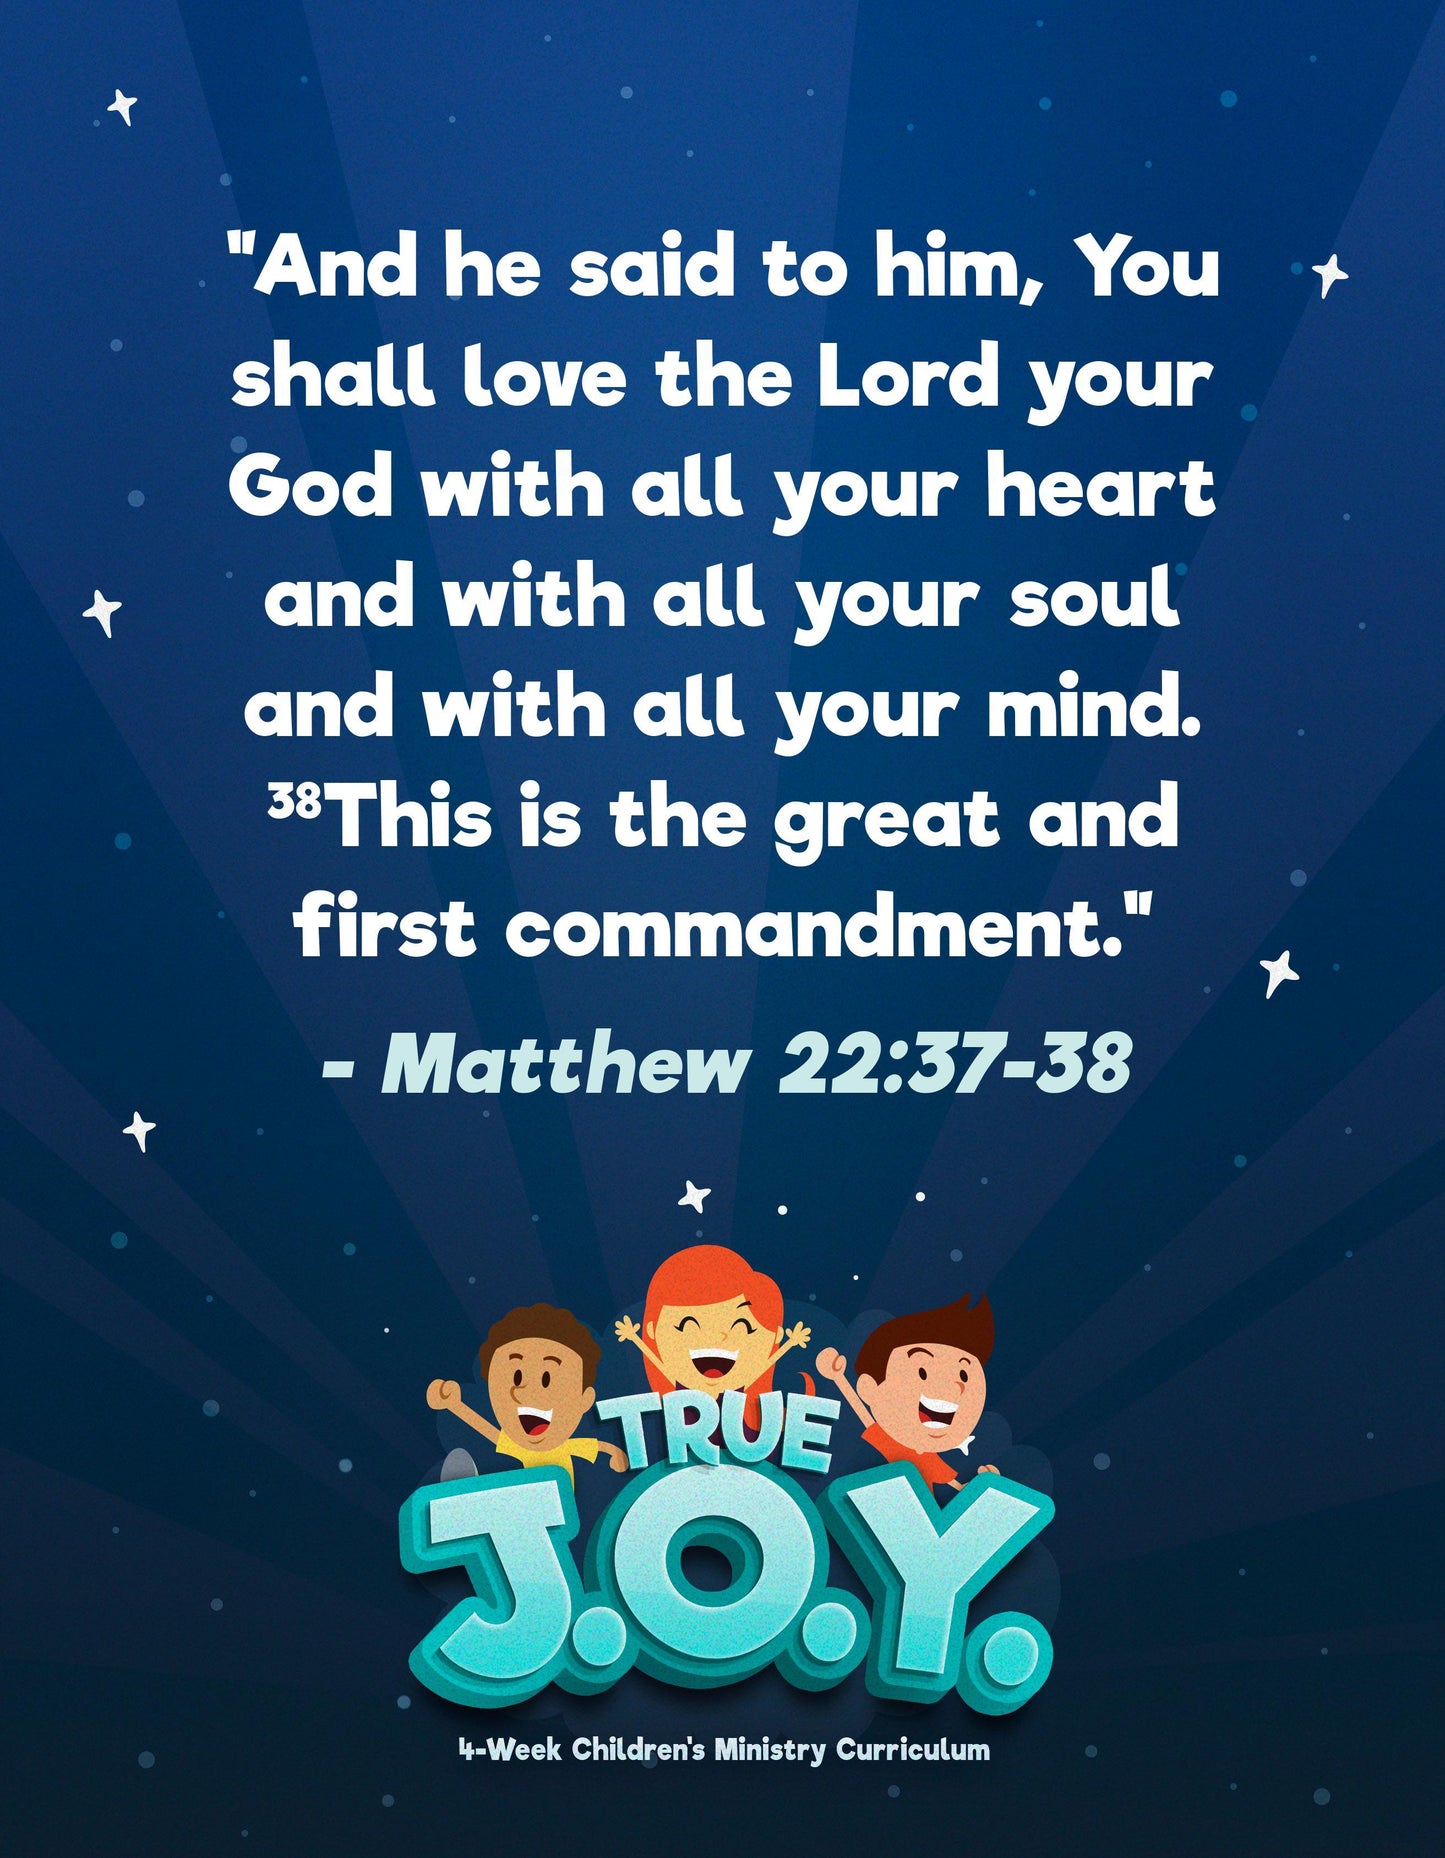 True JOY Curriculum: Free Sample Lesson (download only) - Sunday School Store 